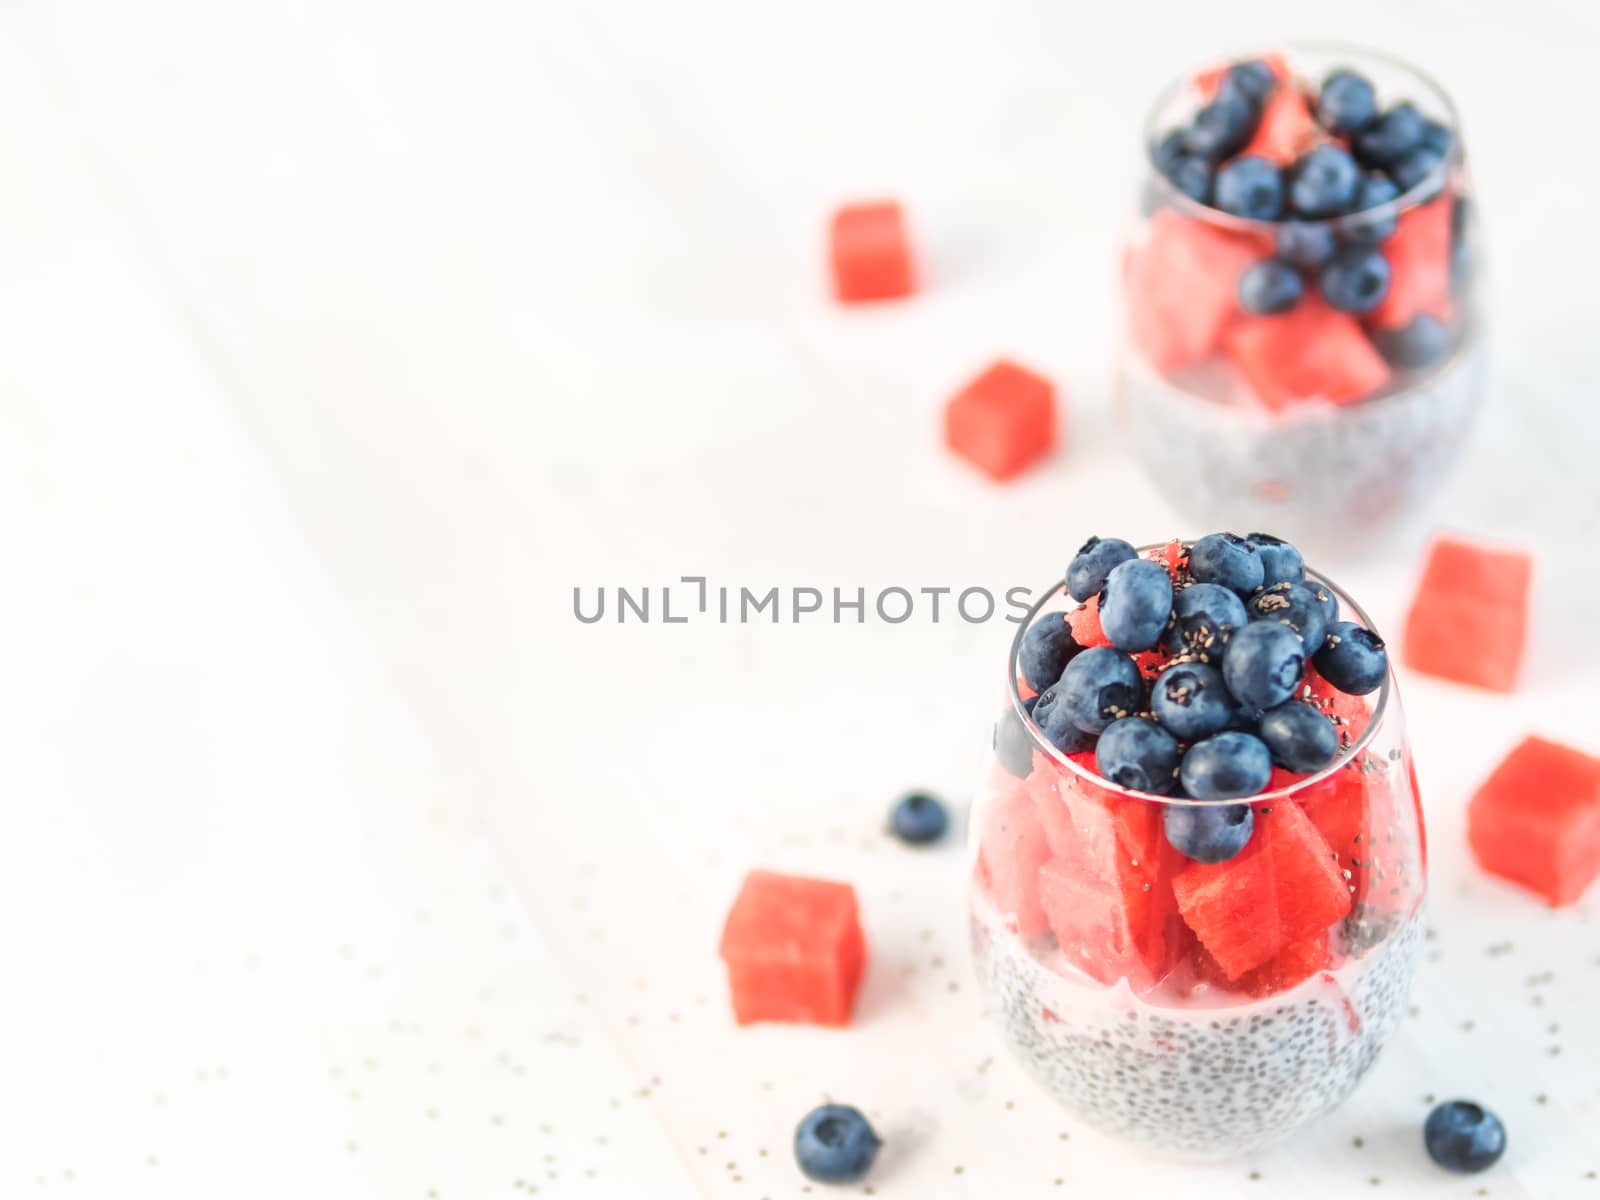 Healthy breakfast concept and idea - chia pudding with watermelon and blueberries. Two glass with chia pudding dressed watermelon and blueberry on white wooden tabletop. Copy space for text.